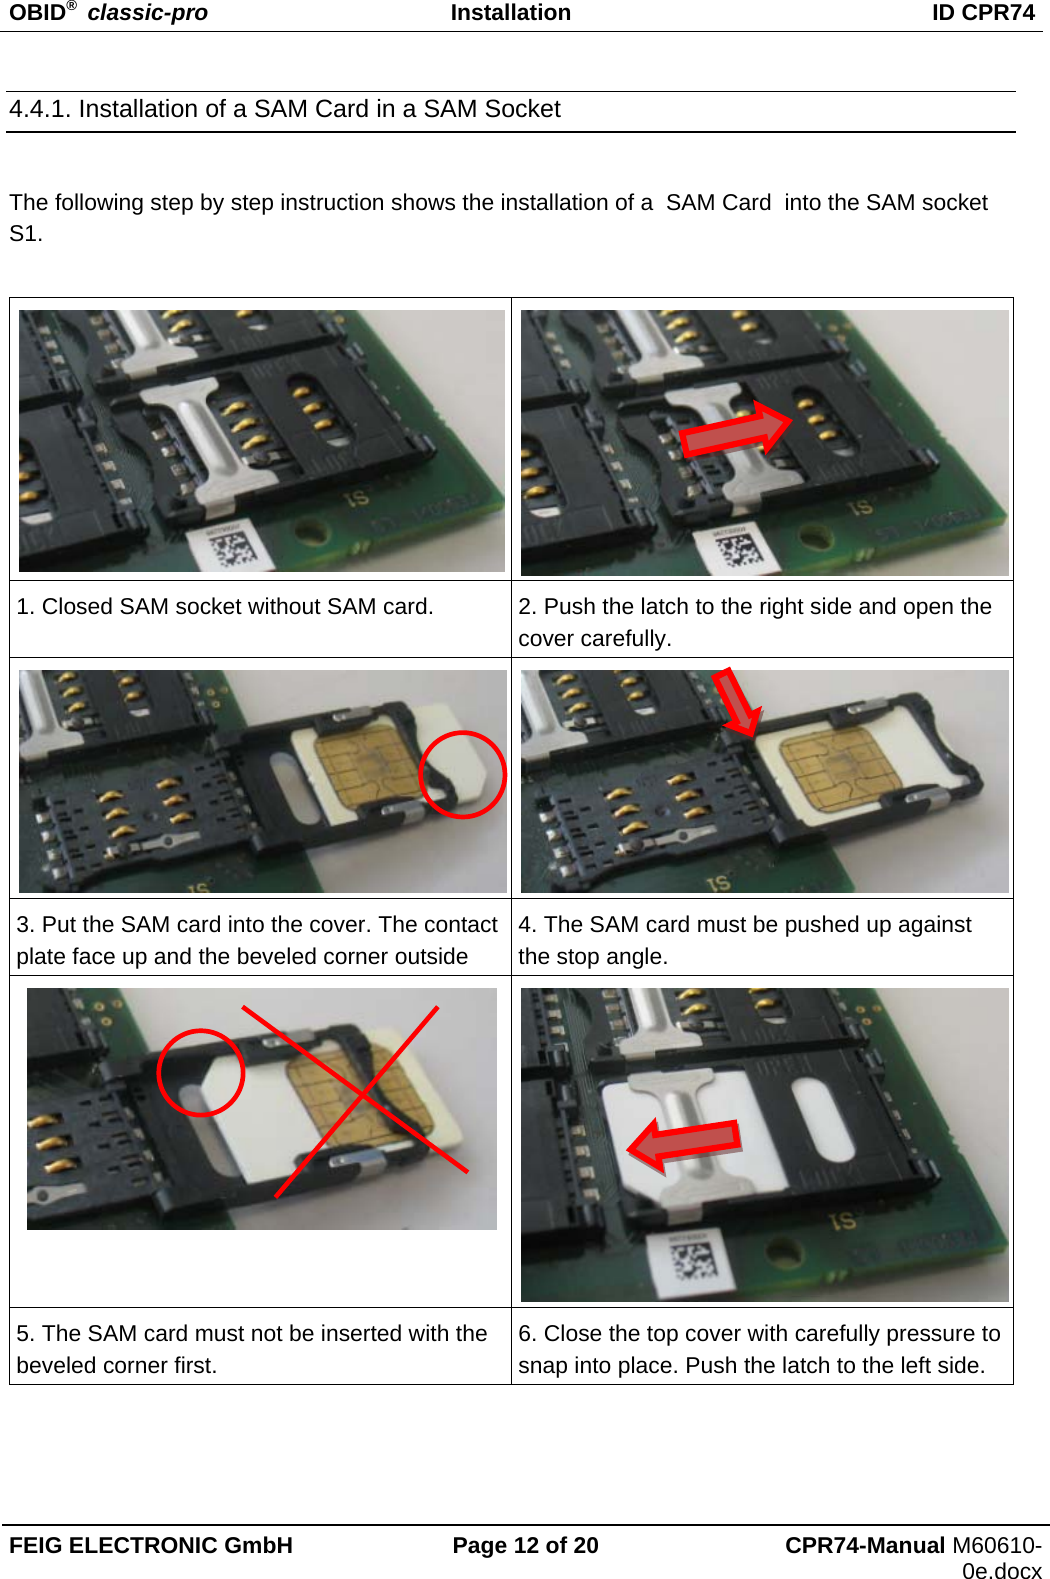 OBID®  classic-pro Installation  ID CPR74 FEIG ELECTRONIC GmbH  Page 12 of 20  CPR74-Manual M60610-0e.docx 4.4.1. Installation of a SAM Card in a SAM Socket  The following step by step instruction shows the installation of a  SAM Card  into the SAM socket S1.   1. Closed SAM socket without SAM card.  2. Push the latch to the right side and open the cover carefully. 3. Put the SAM card into the cover. The contact plate face up and the beveled corner outside 4. The SAM card must be pushed up against the stop angle.  5. The SAM card must not be inserted with the beveled corner first. 6. Close the top cover with carefully pressure to snap into place. Push the latch to the left side.   